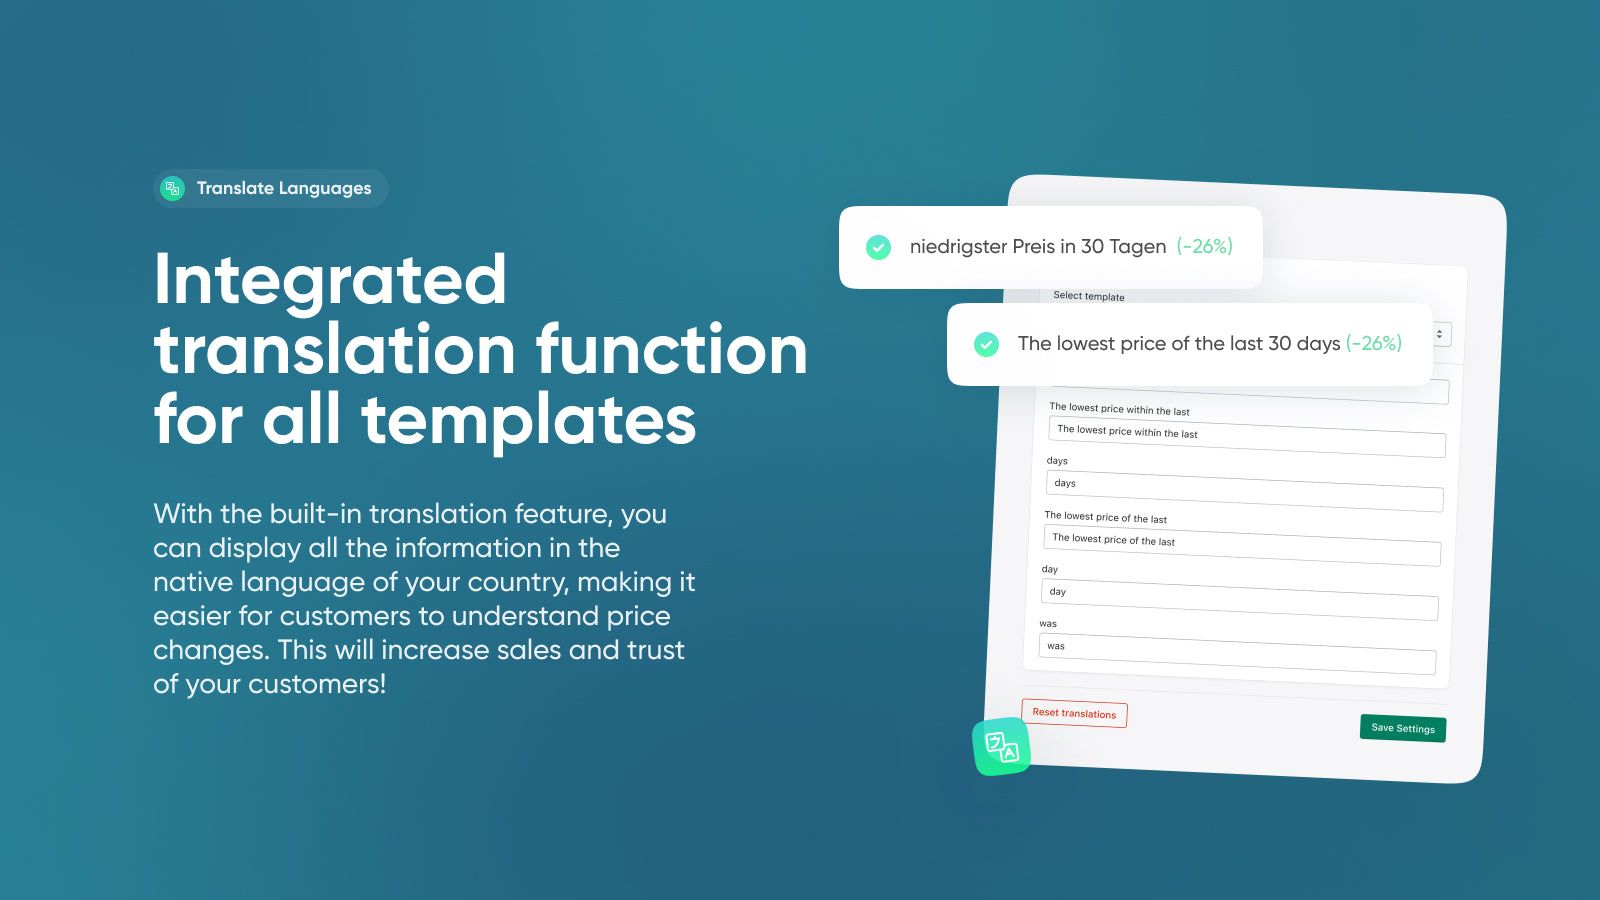 Integrated translation function for all templates.